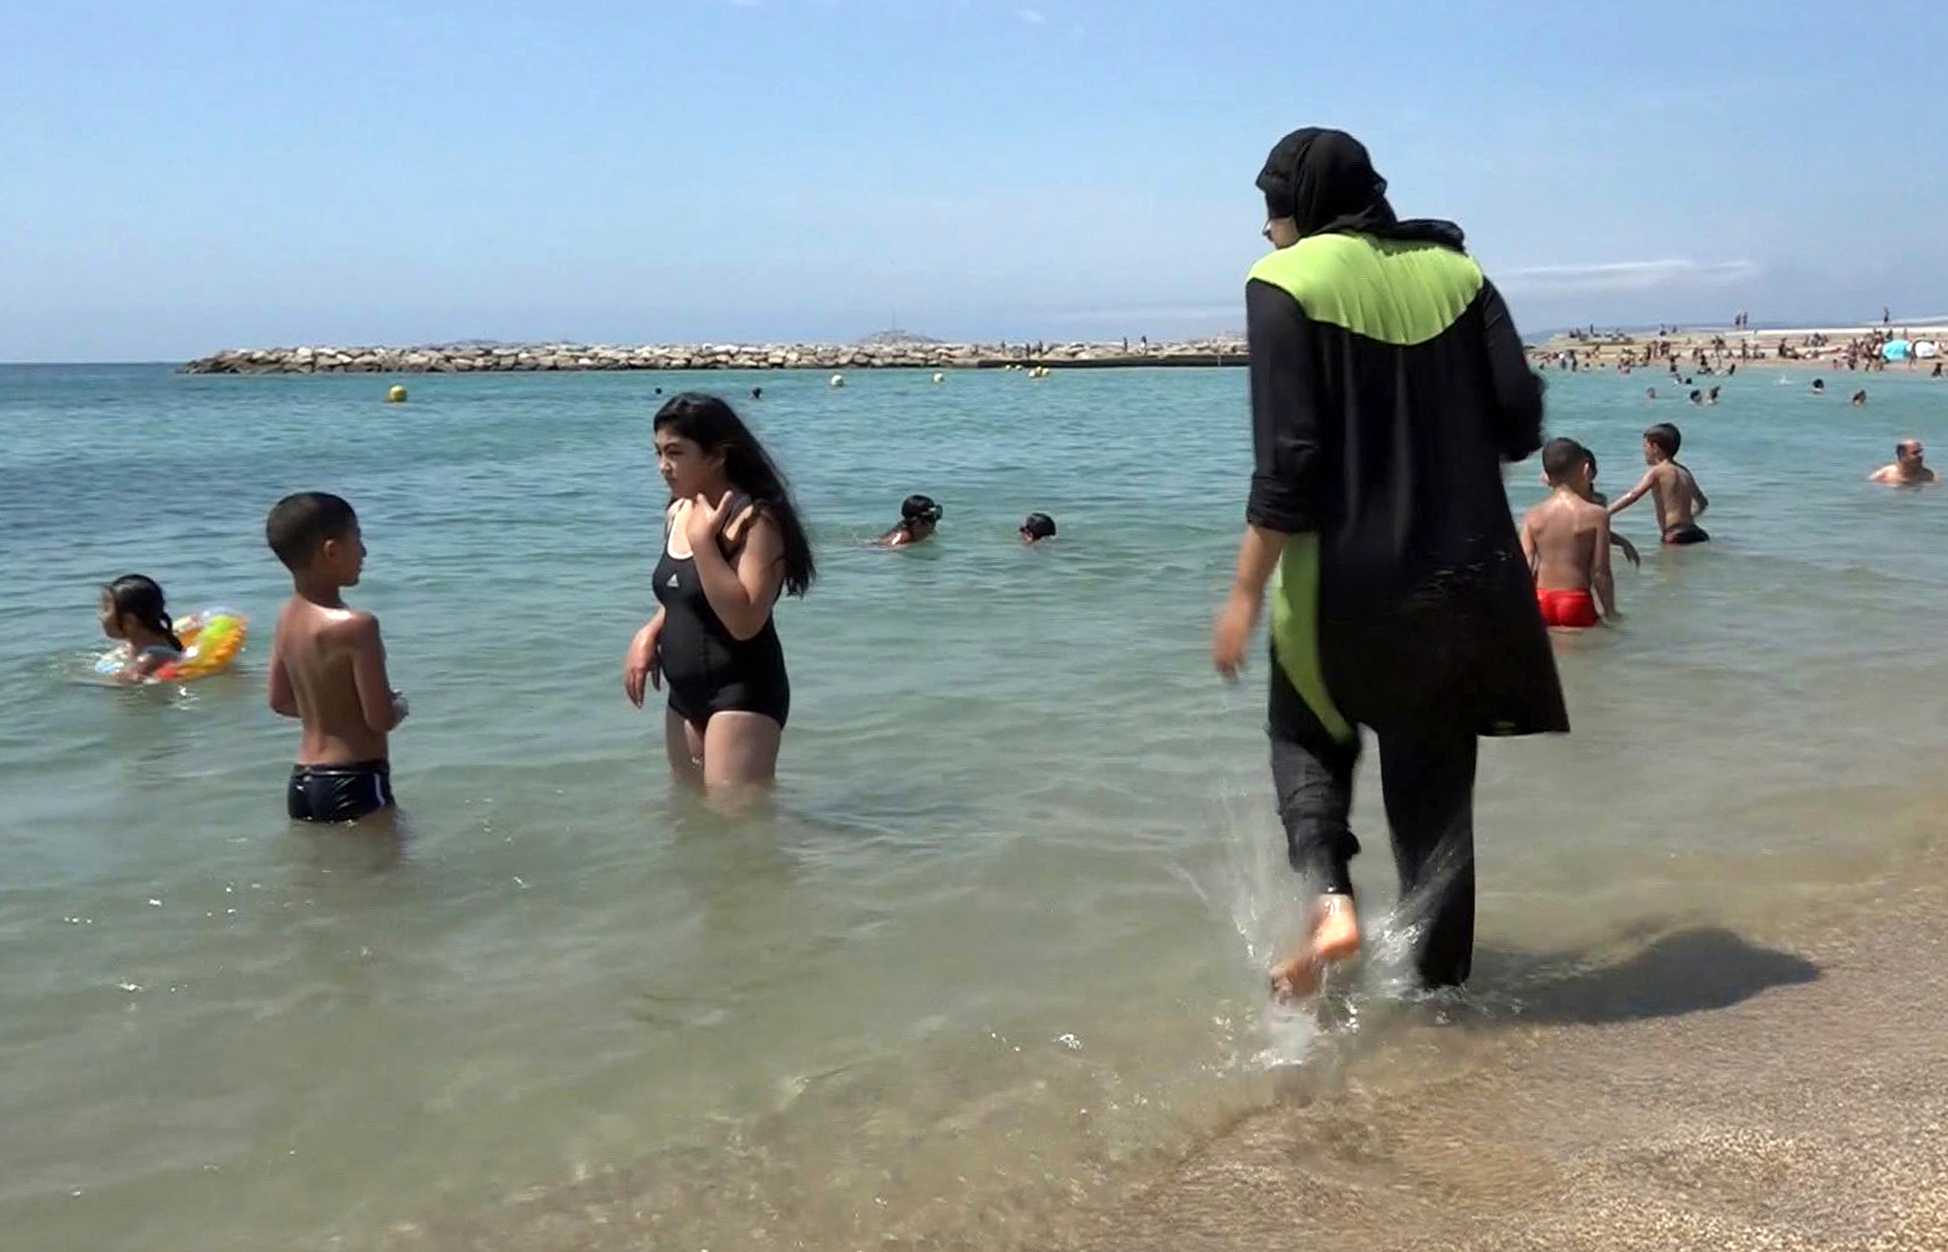 Nissrine Samali, 20, gets into the sea wearing a burkini, a wetsuit-like garment that also covers the head, in Marseille, southern France, Aug. 4, 2016. France's Socialist prime minister Manuel Valls is expressing support for local bans of burkinis, saying the swimwear is based on the "enslavement of women" and therefore not compatible with French values. (AP)